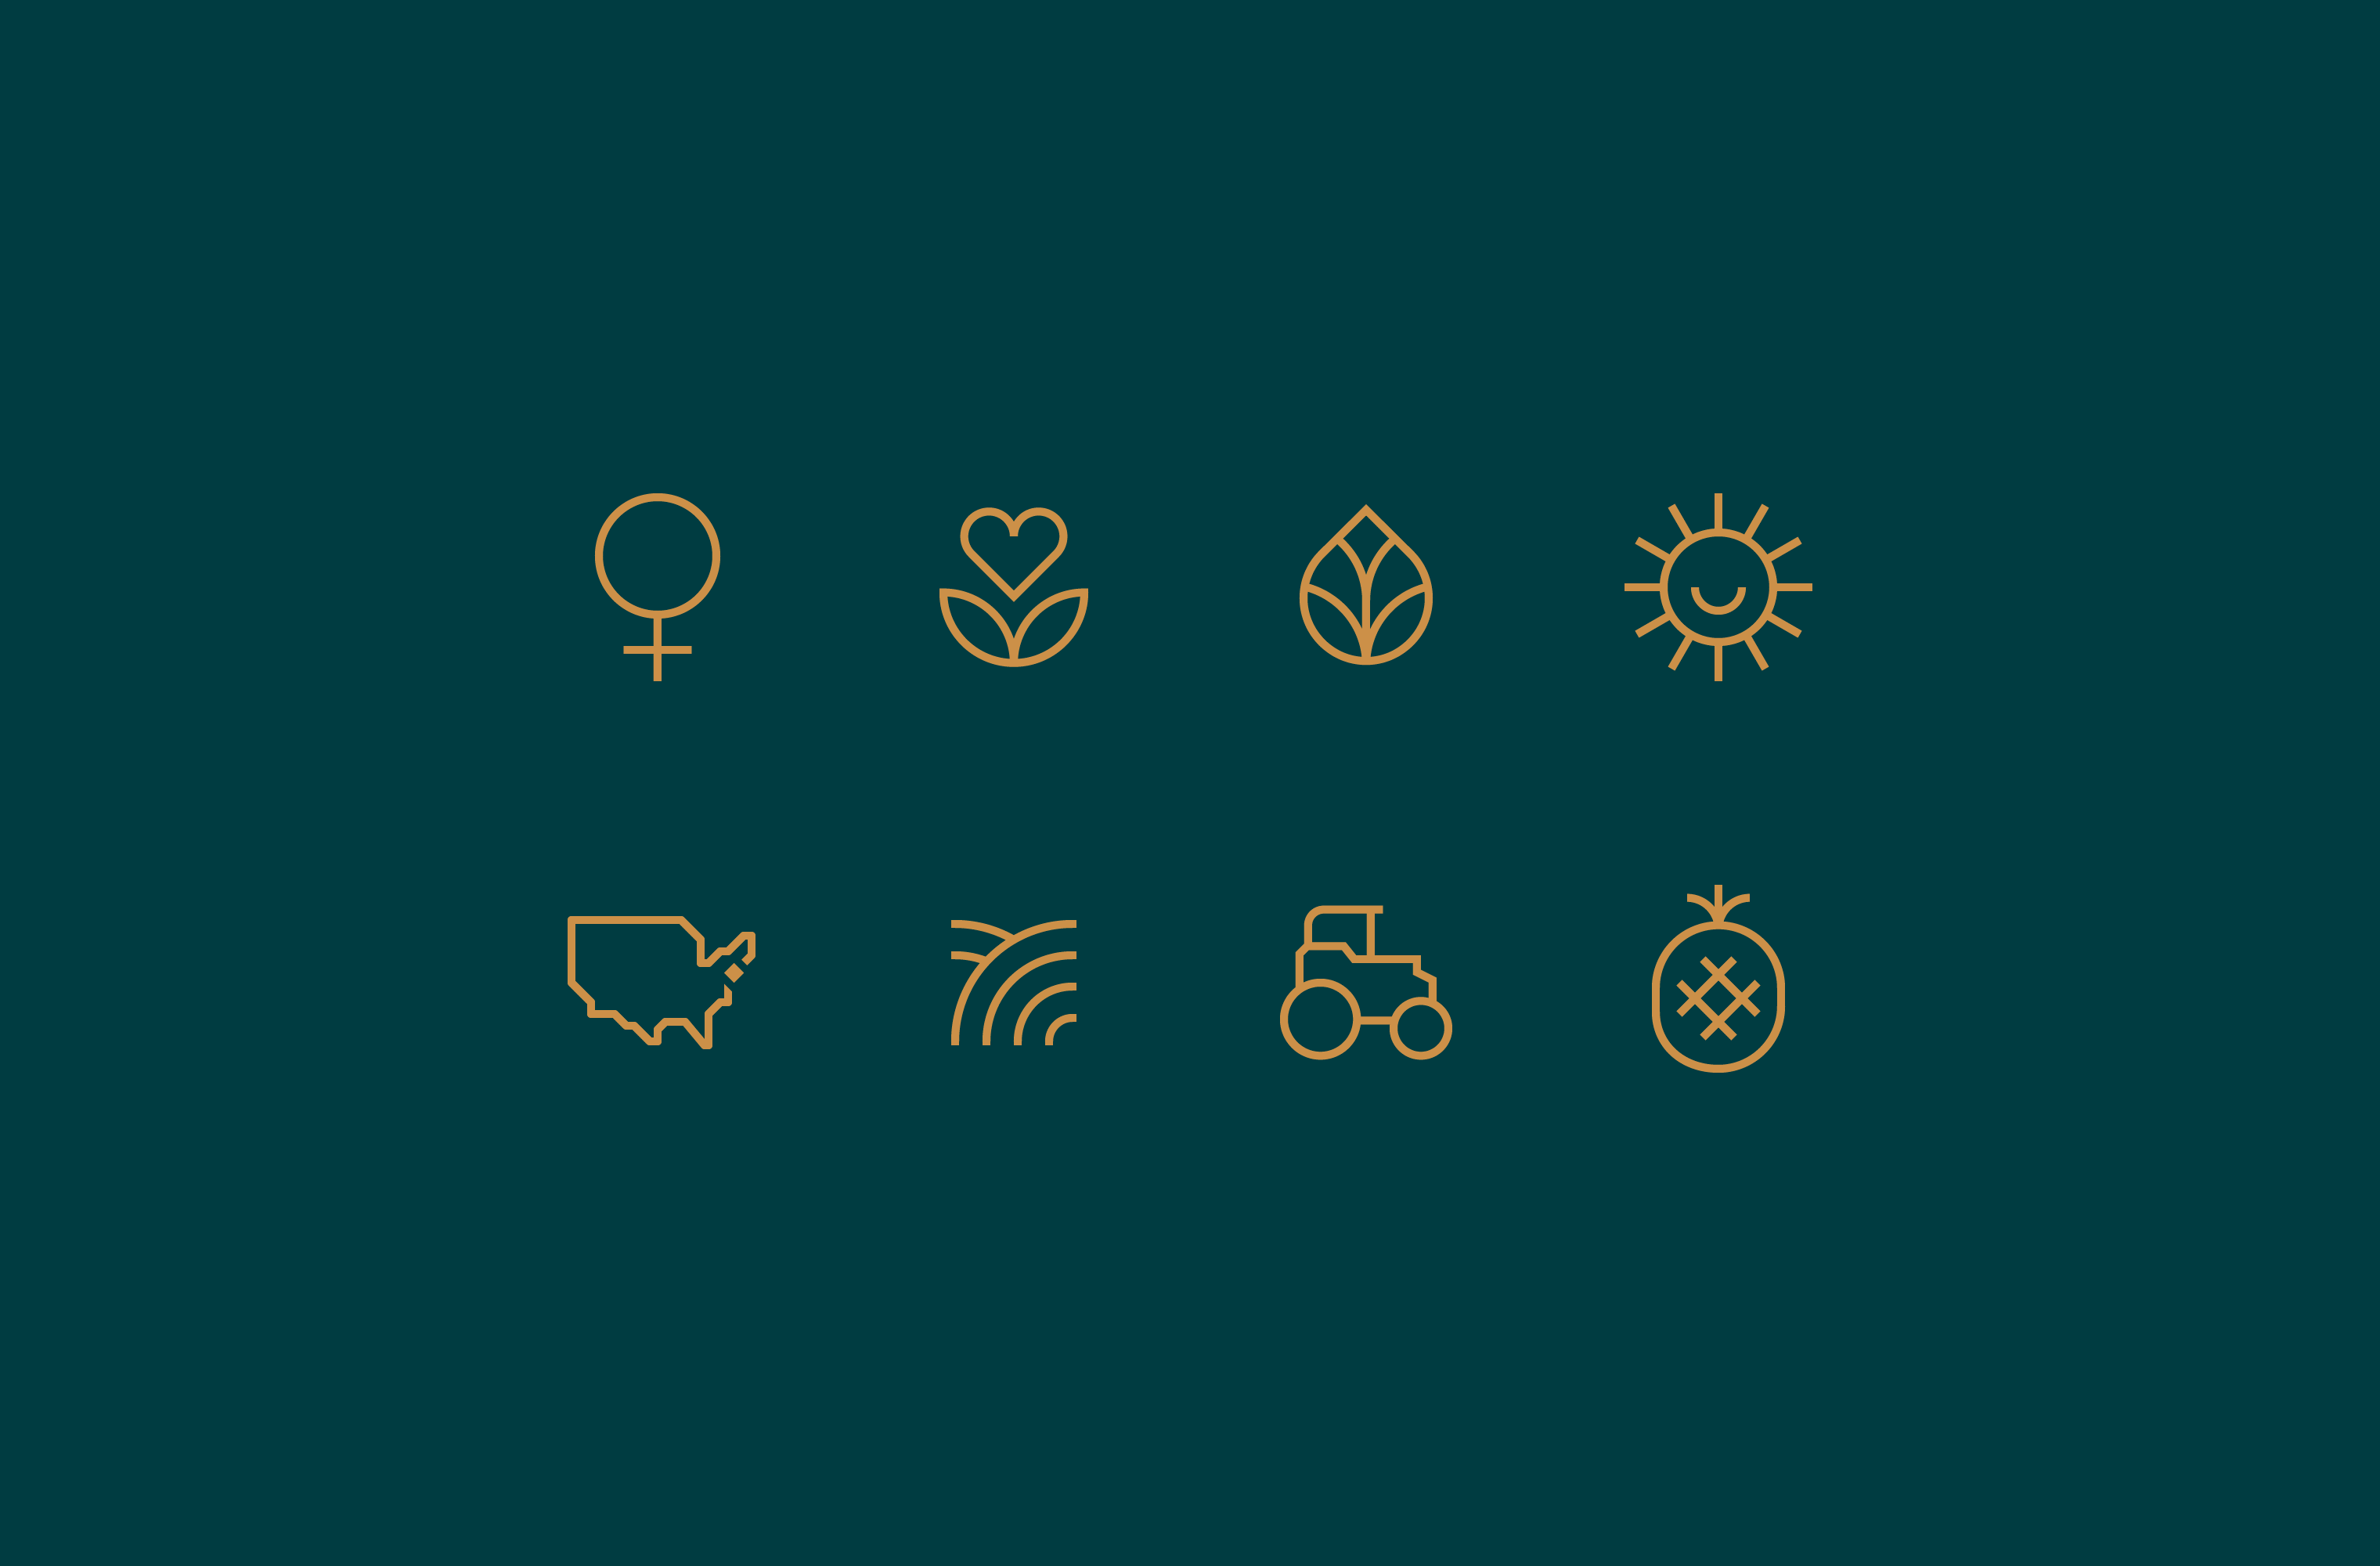 Yellow Grazy icon set on a teal background